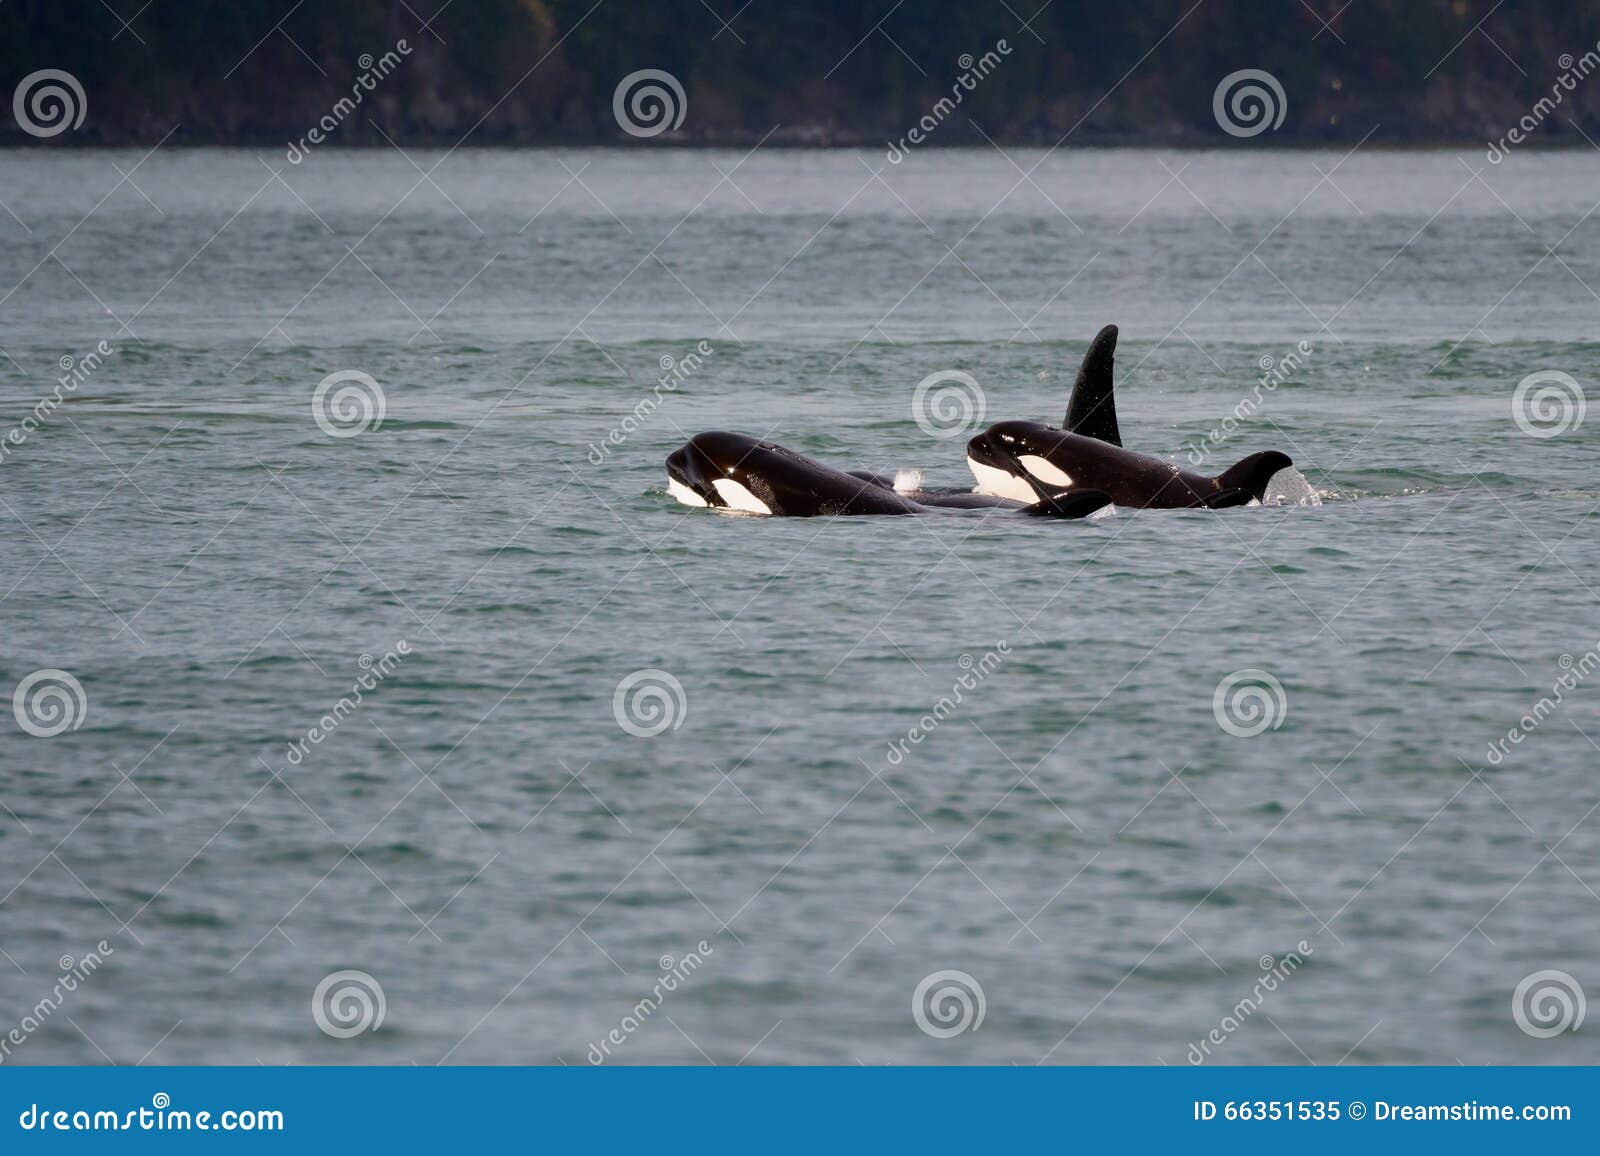 young orcas